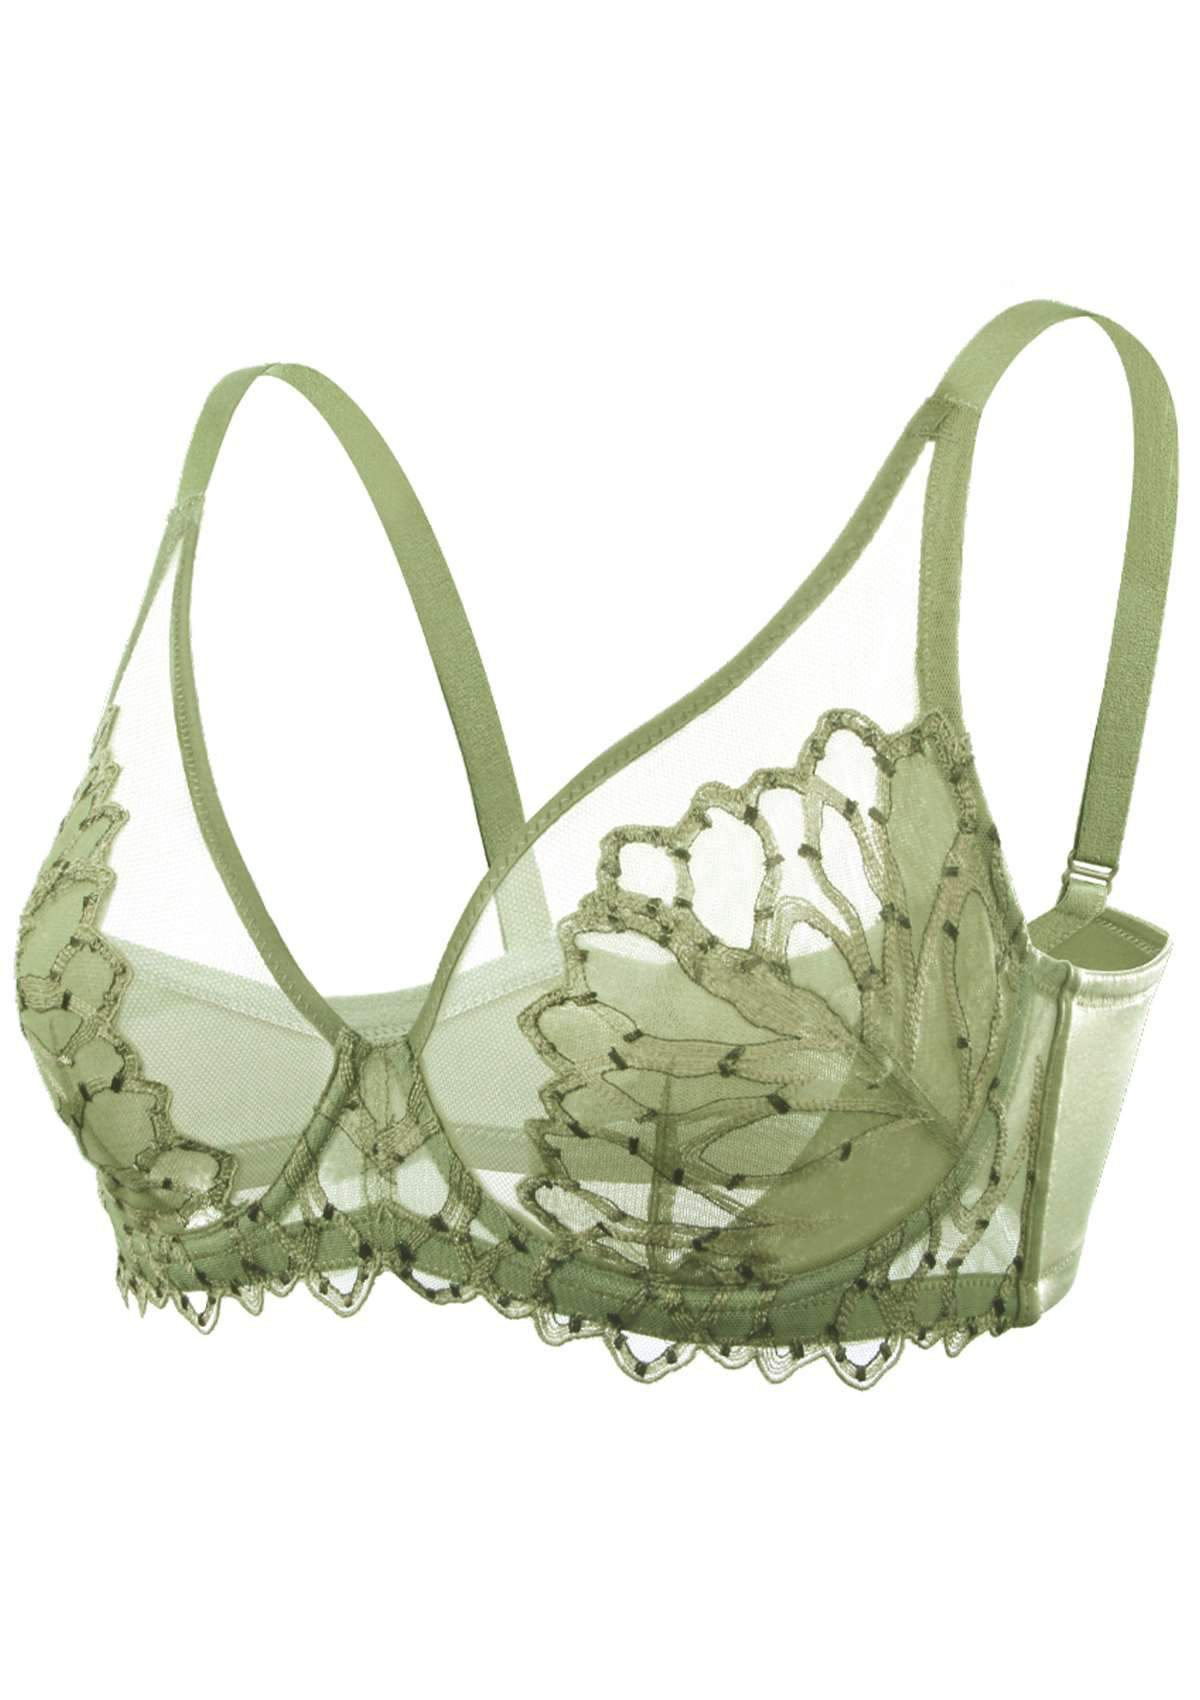 HSIA Chrysanthemum Floral Embroidered Bra: Lace Sheer Unpadded Bra - Crystal Blue / 32 / C